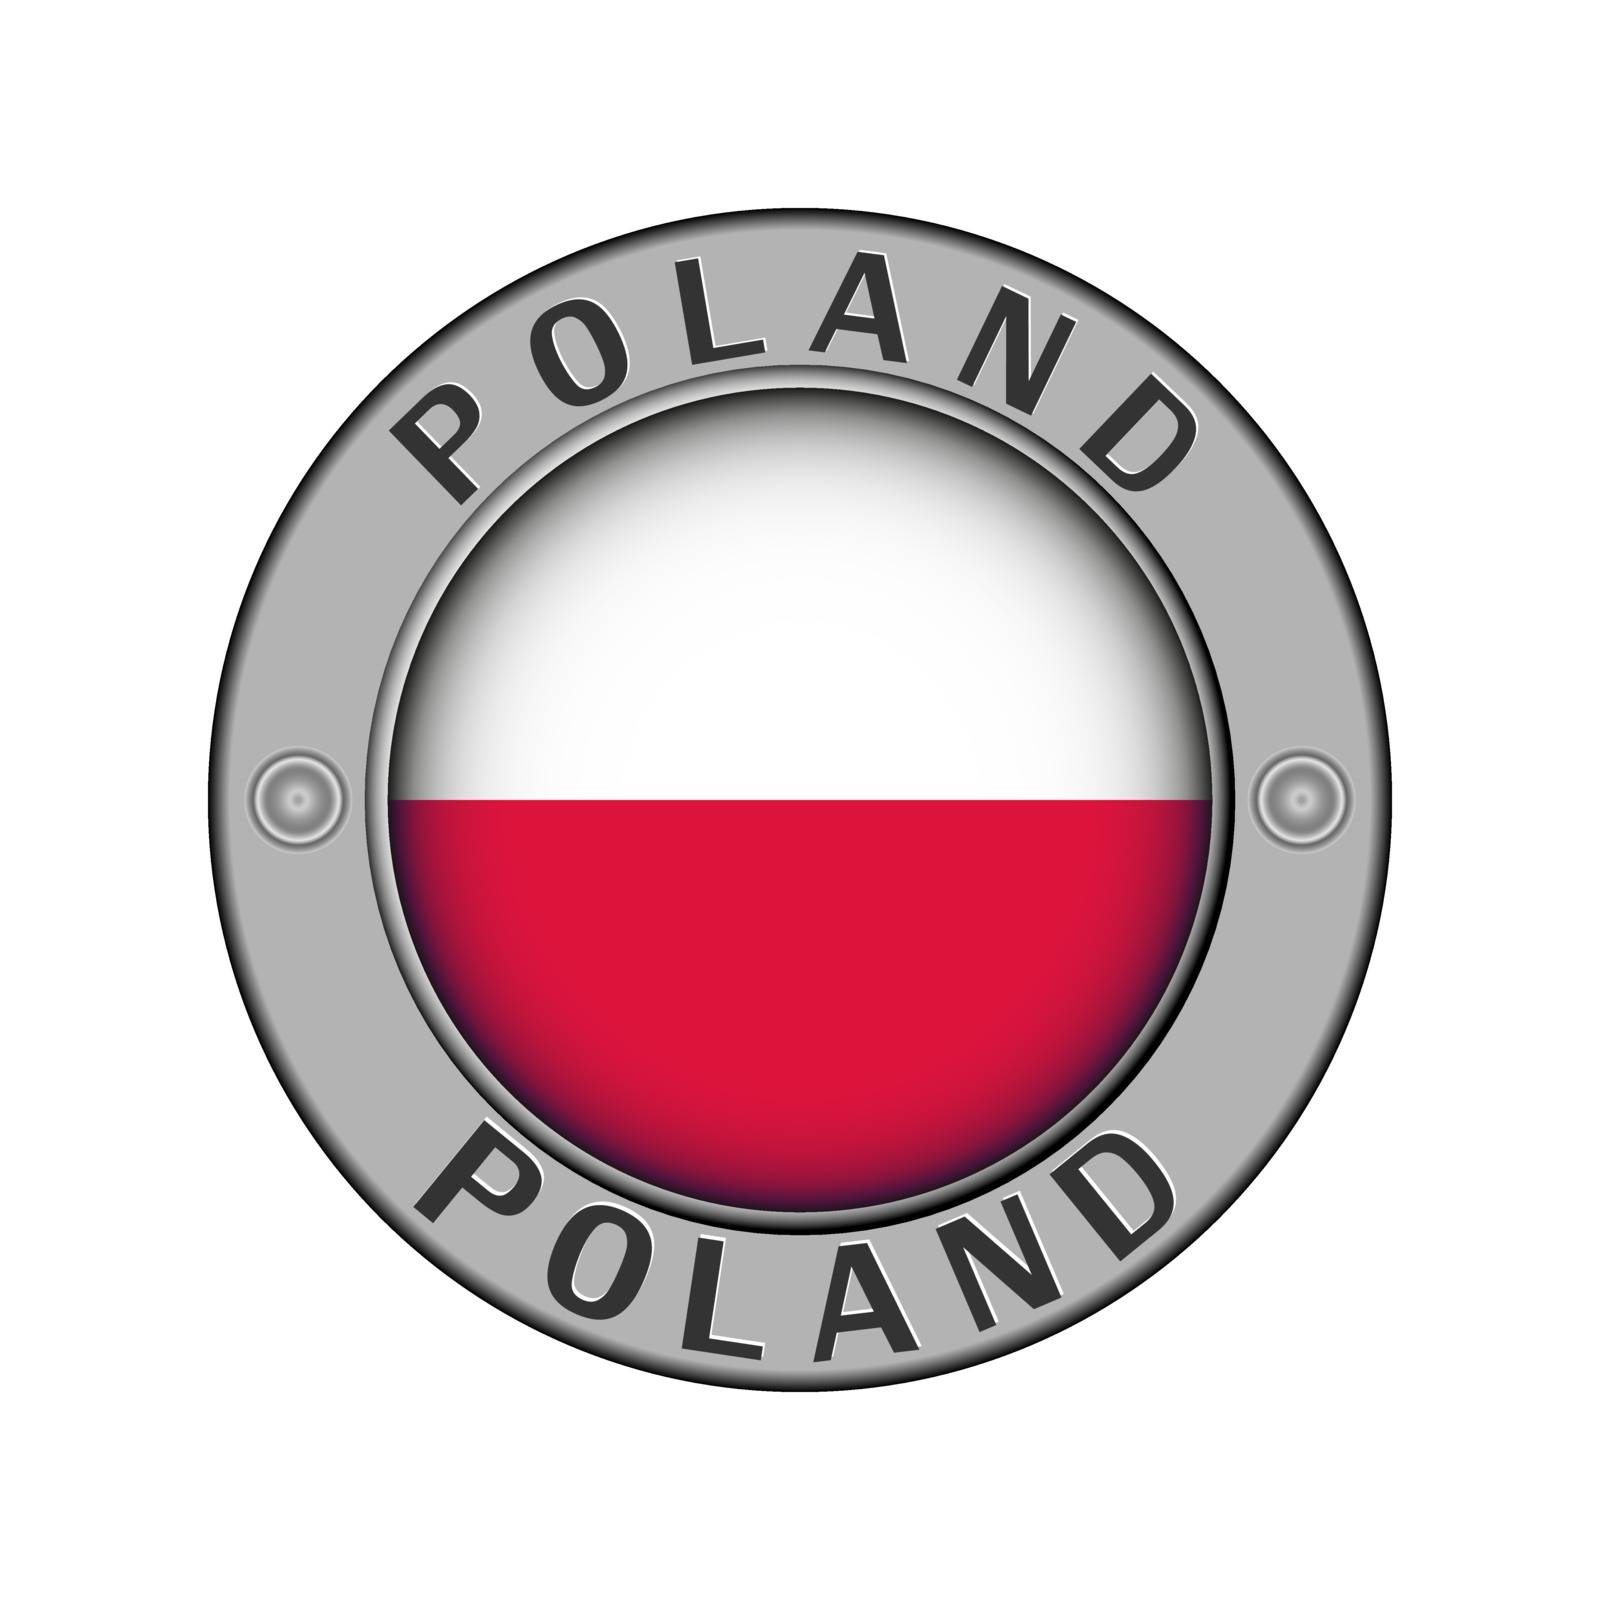 Round metal medallion with the country name Poland and a round f by Grommik